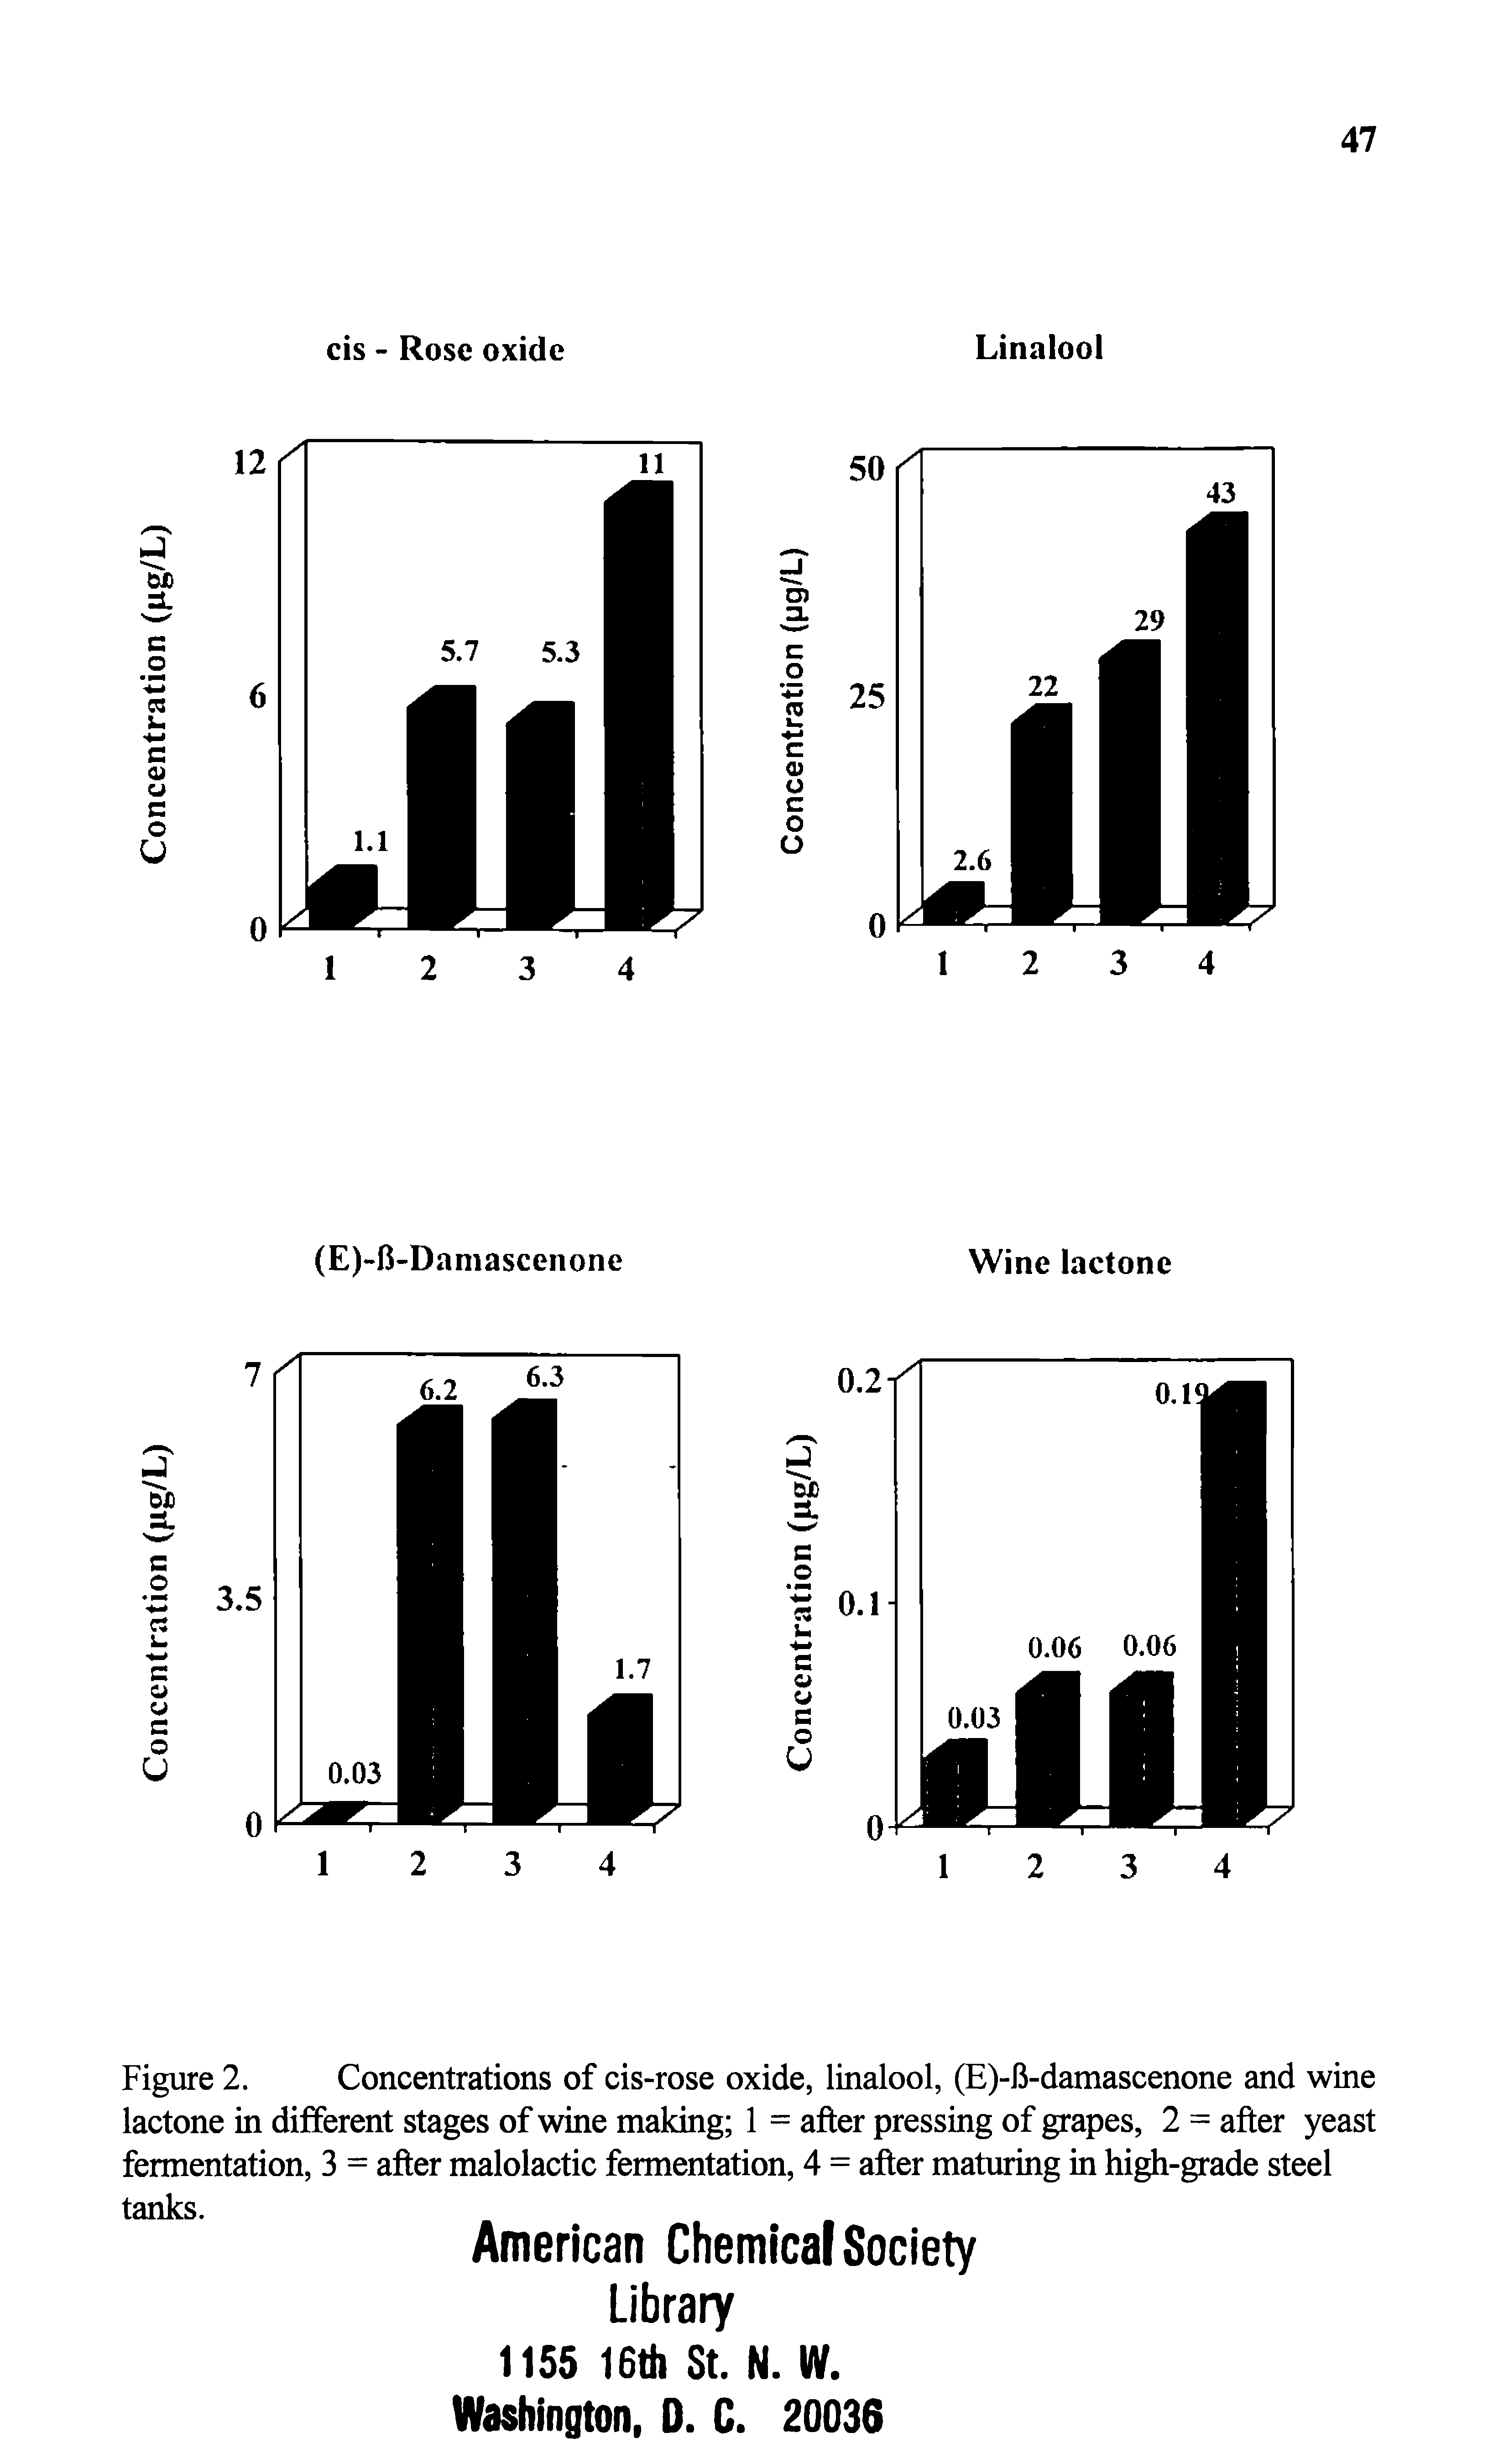 Figure 2. Concentrations of cis-rose oxide, linalool, (E)-li-damascenone and wine lactone in different stages of wine making 1 = after pressing of grapes, 2 = after yeast fermentation, 3 = after malolactic fermentation, 4 = after maturing in high-grade steel...